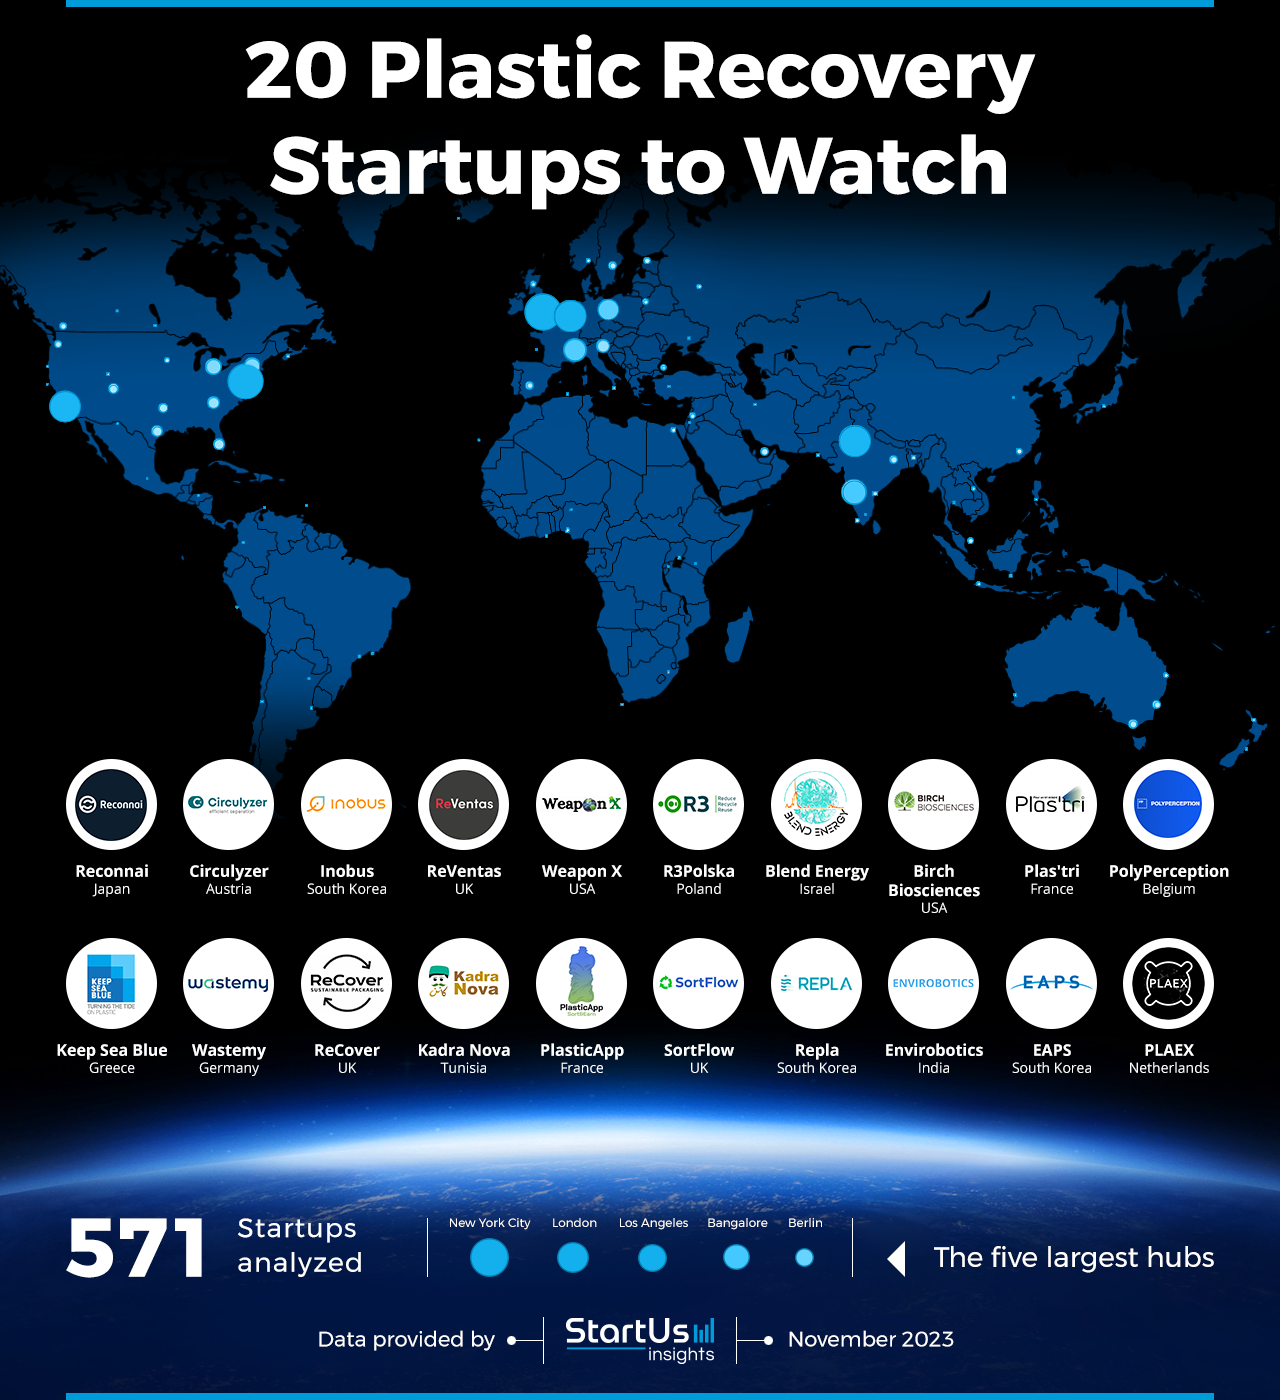 Plastic-Recovery-Startups-to-Watch-Heat-Map-StartUs-Insights-noresize